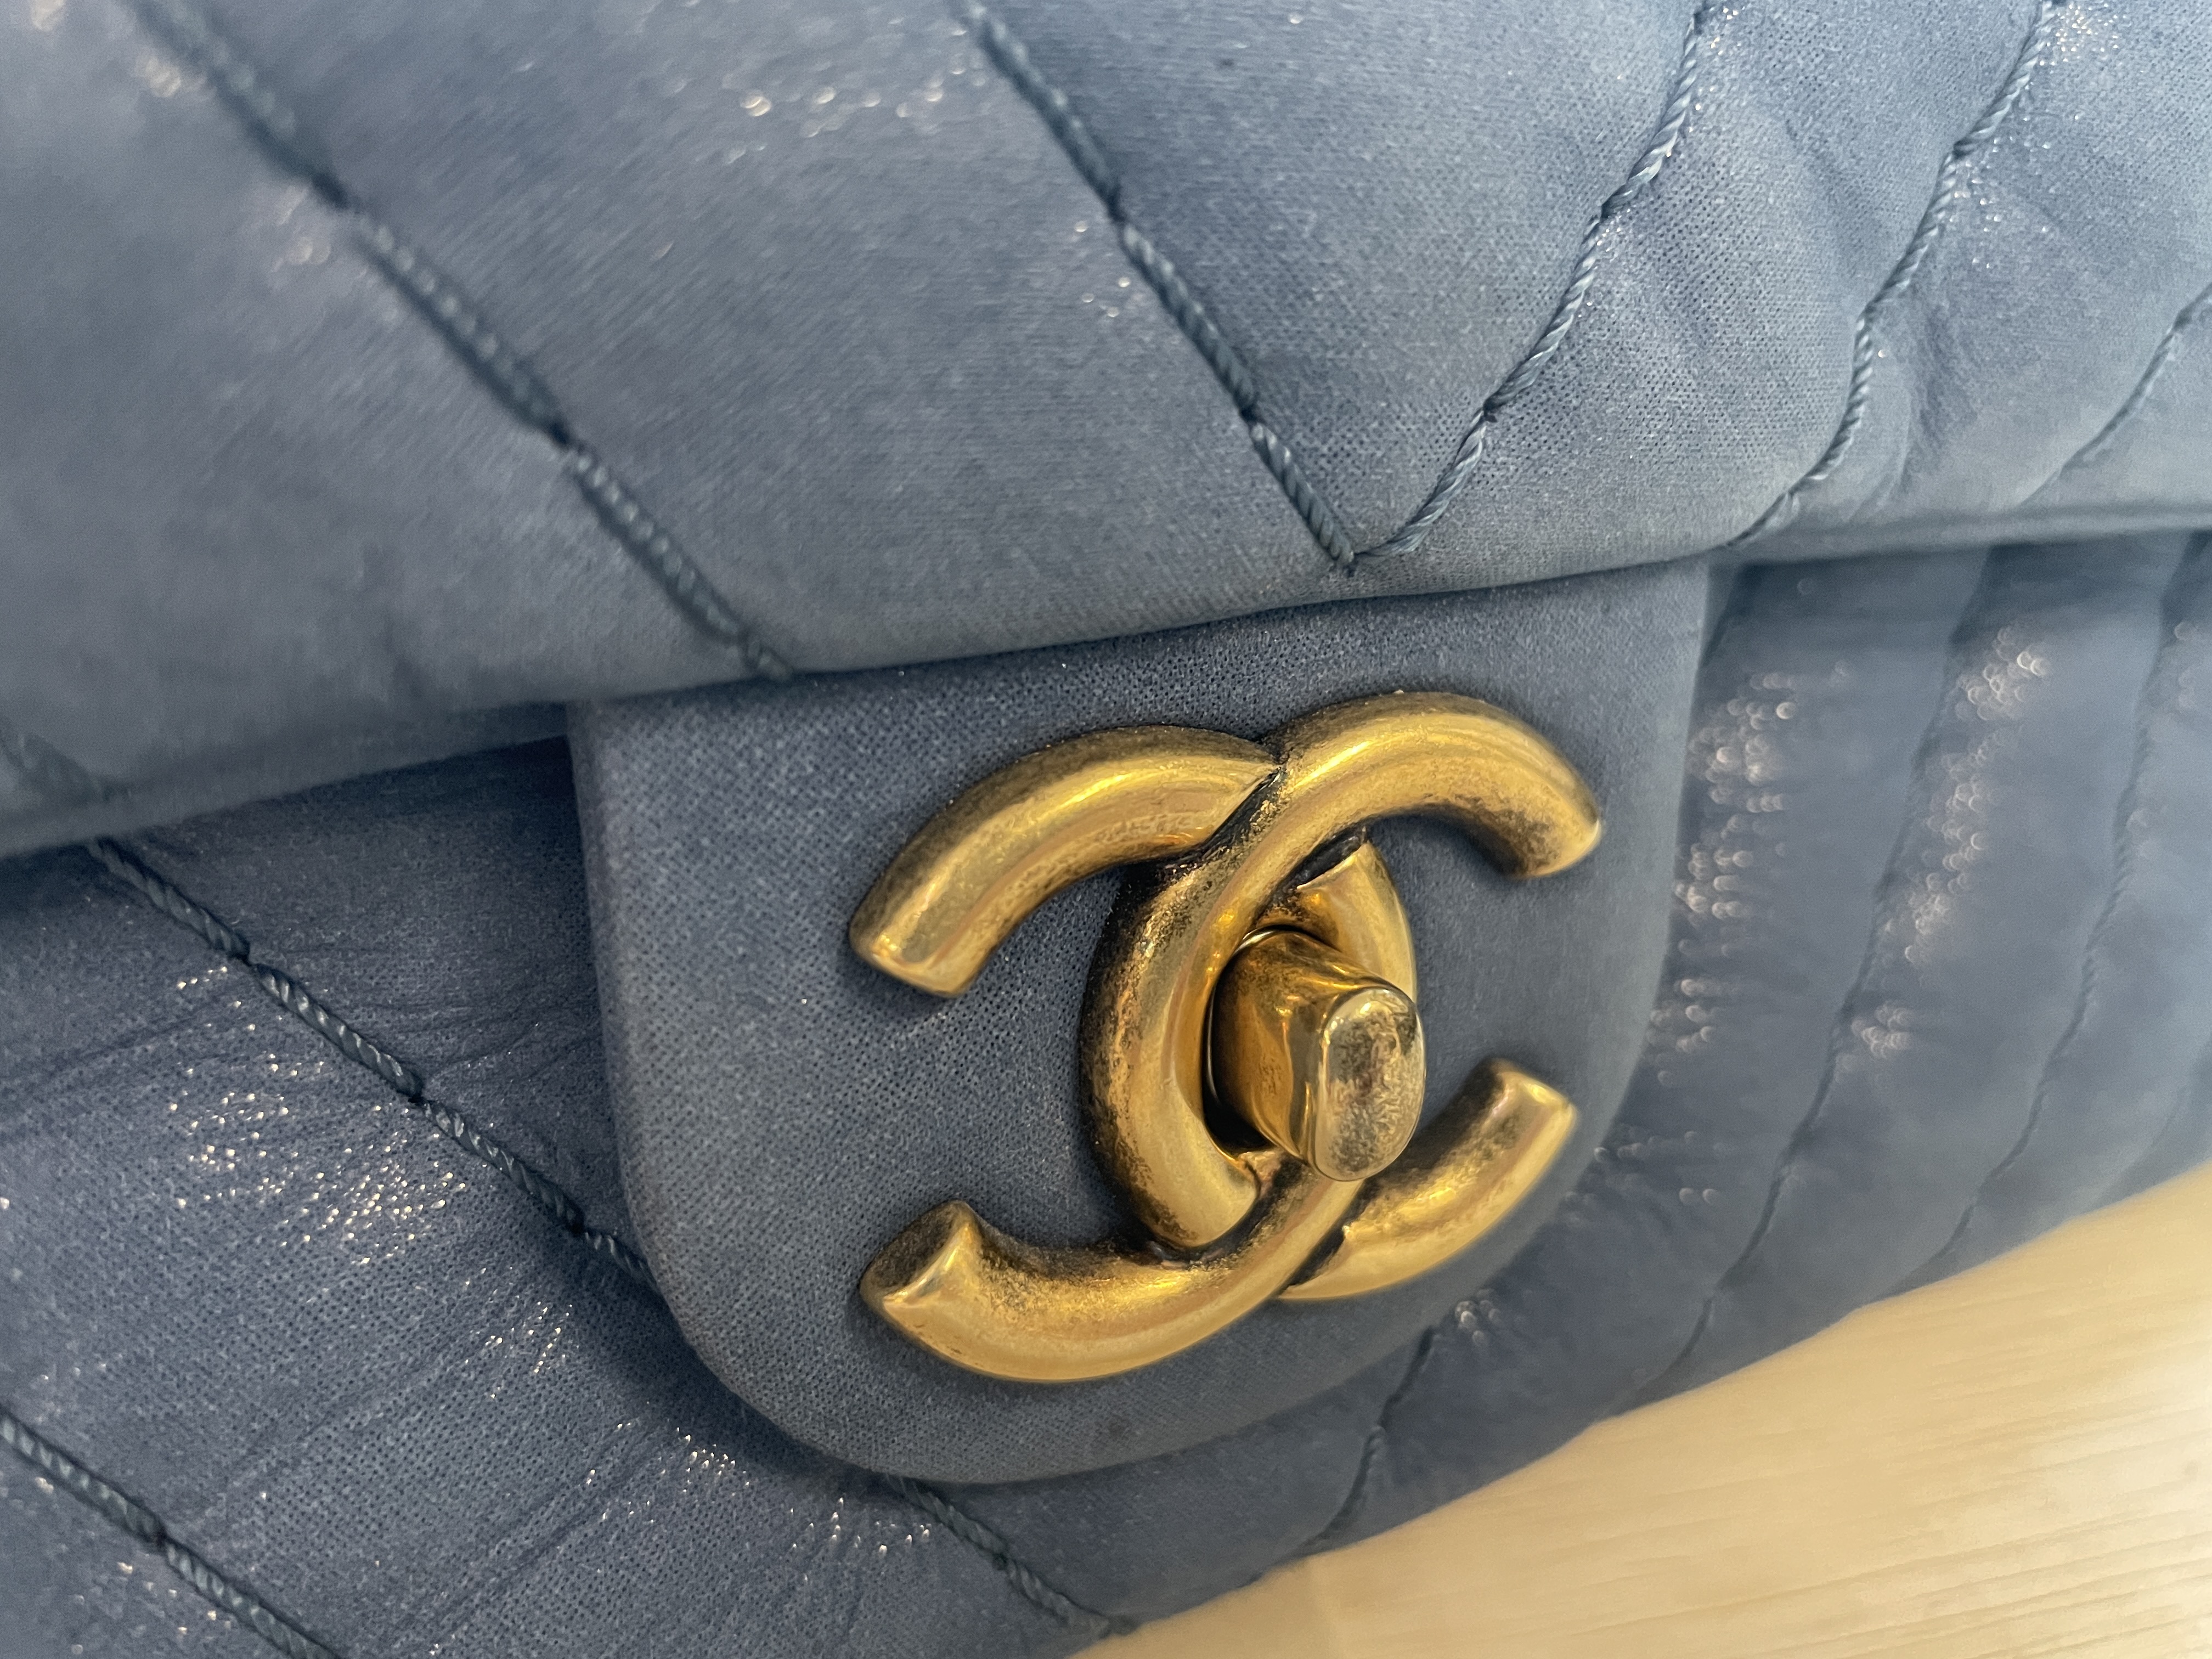 A CHANEL BLUE CHEVRON QUILTED FLAP BAG - Image 6 of 9